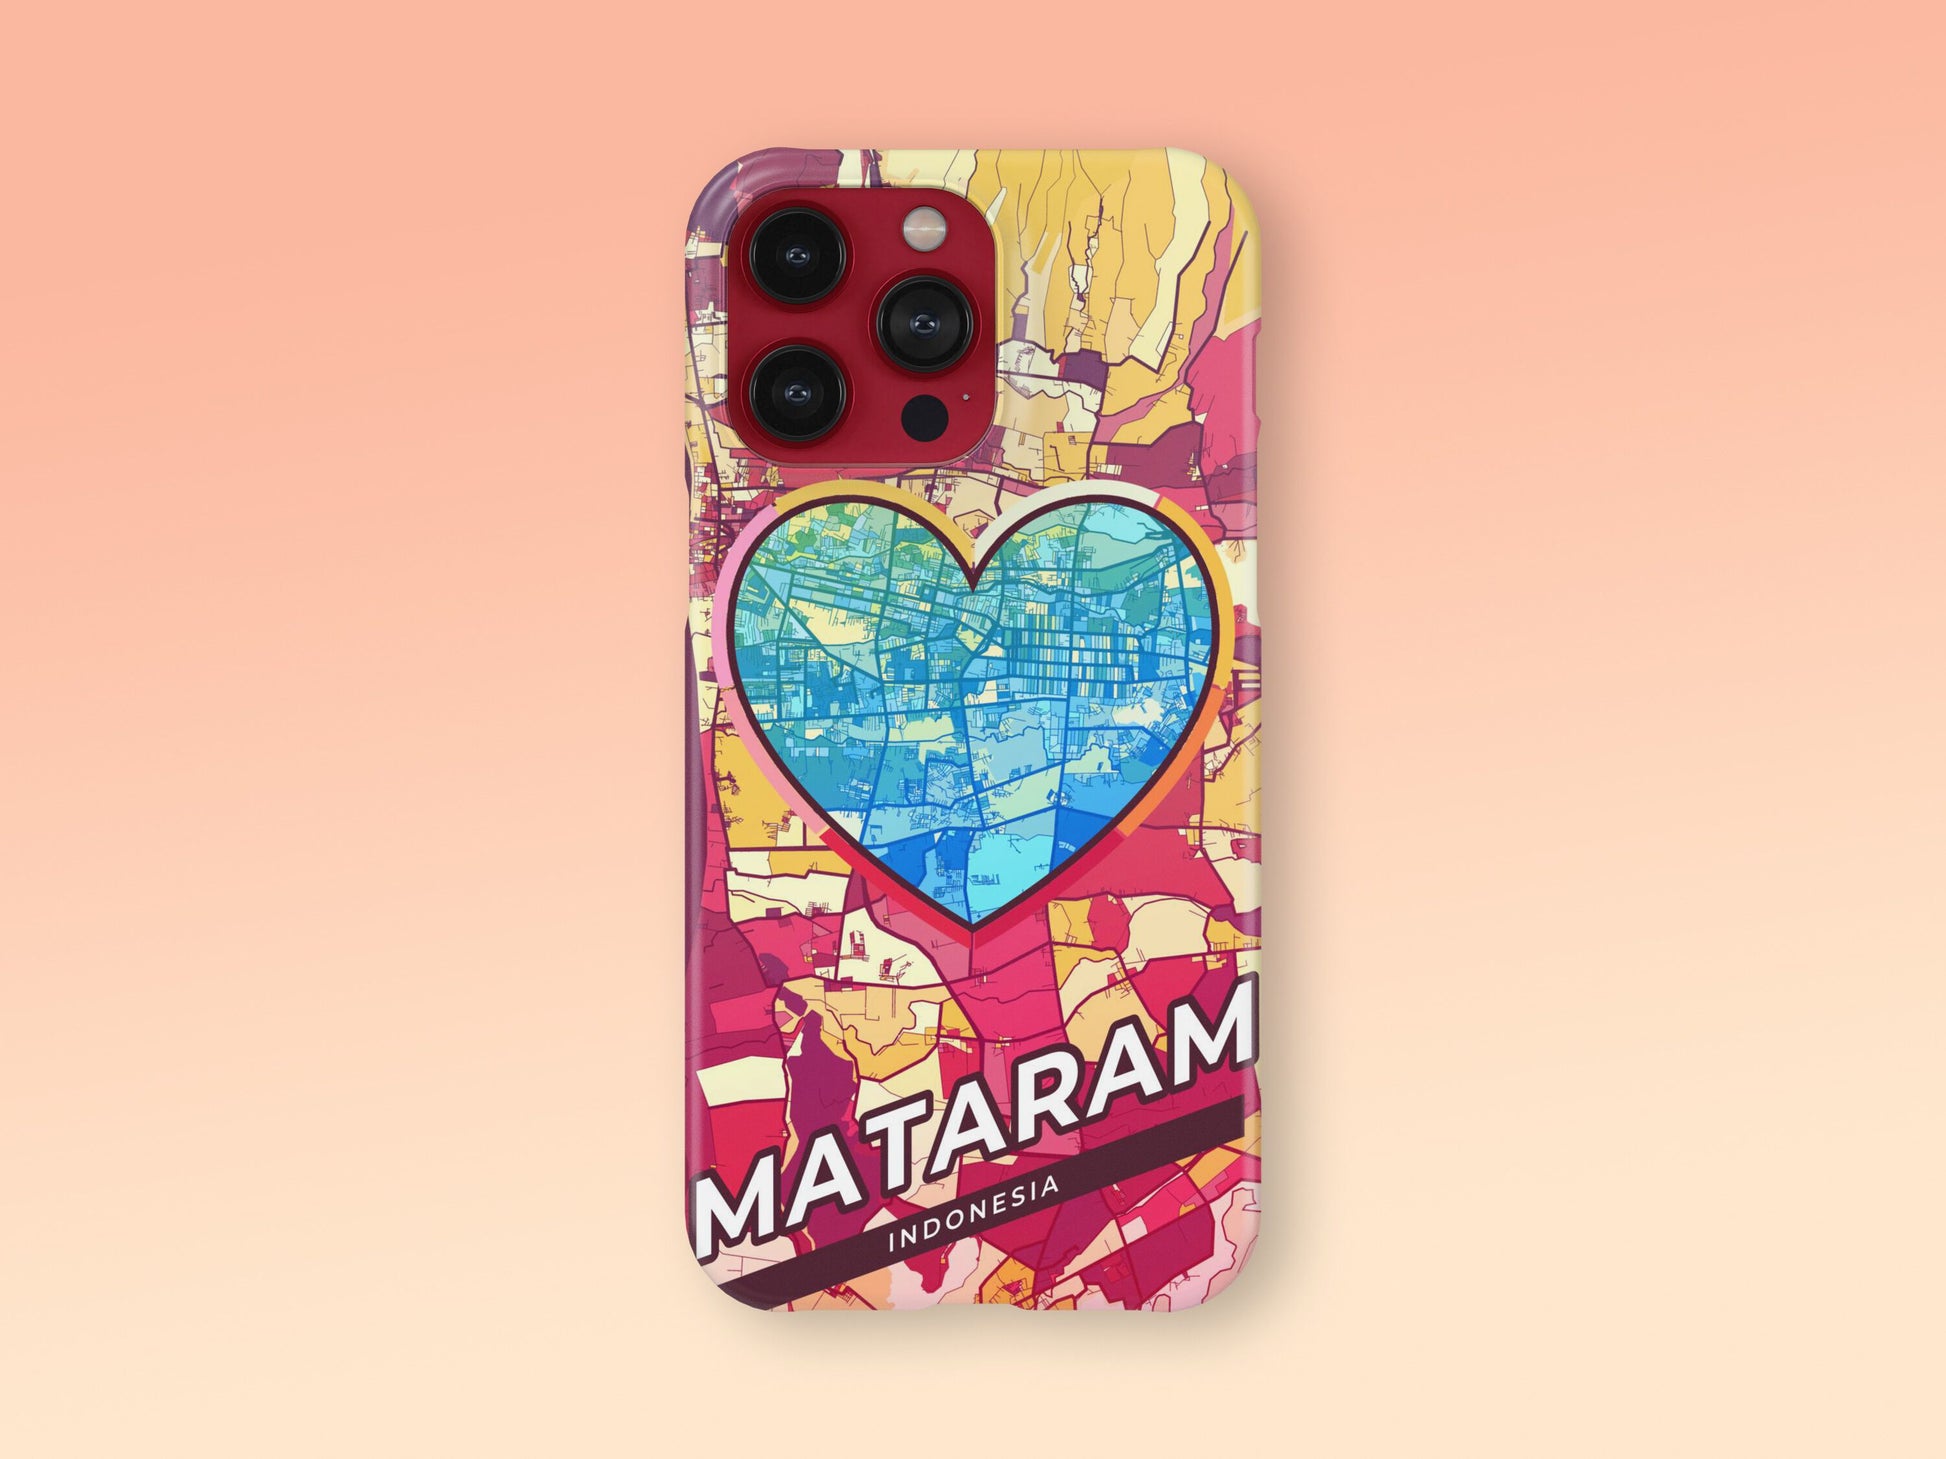 Mataram Indonesia slim phone case with colorful icon. Birthday, wedding or housewarming gift. Couple match cases. 2